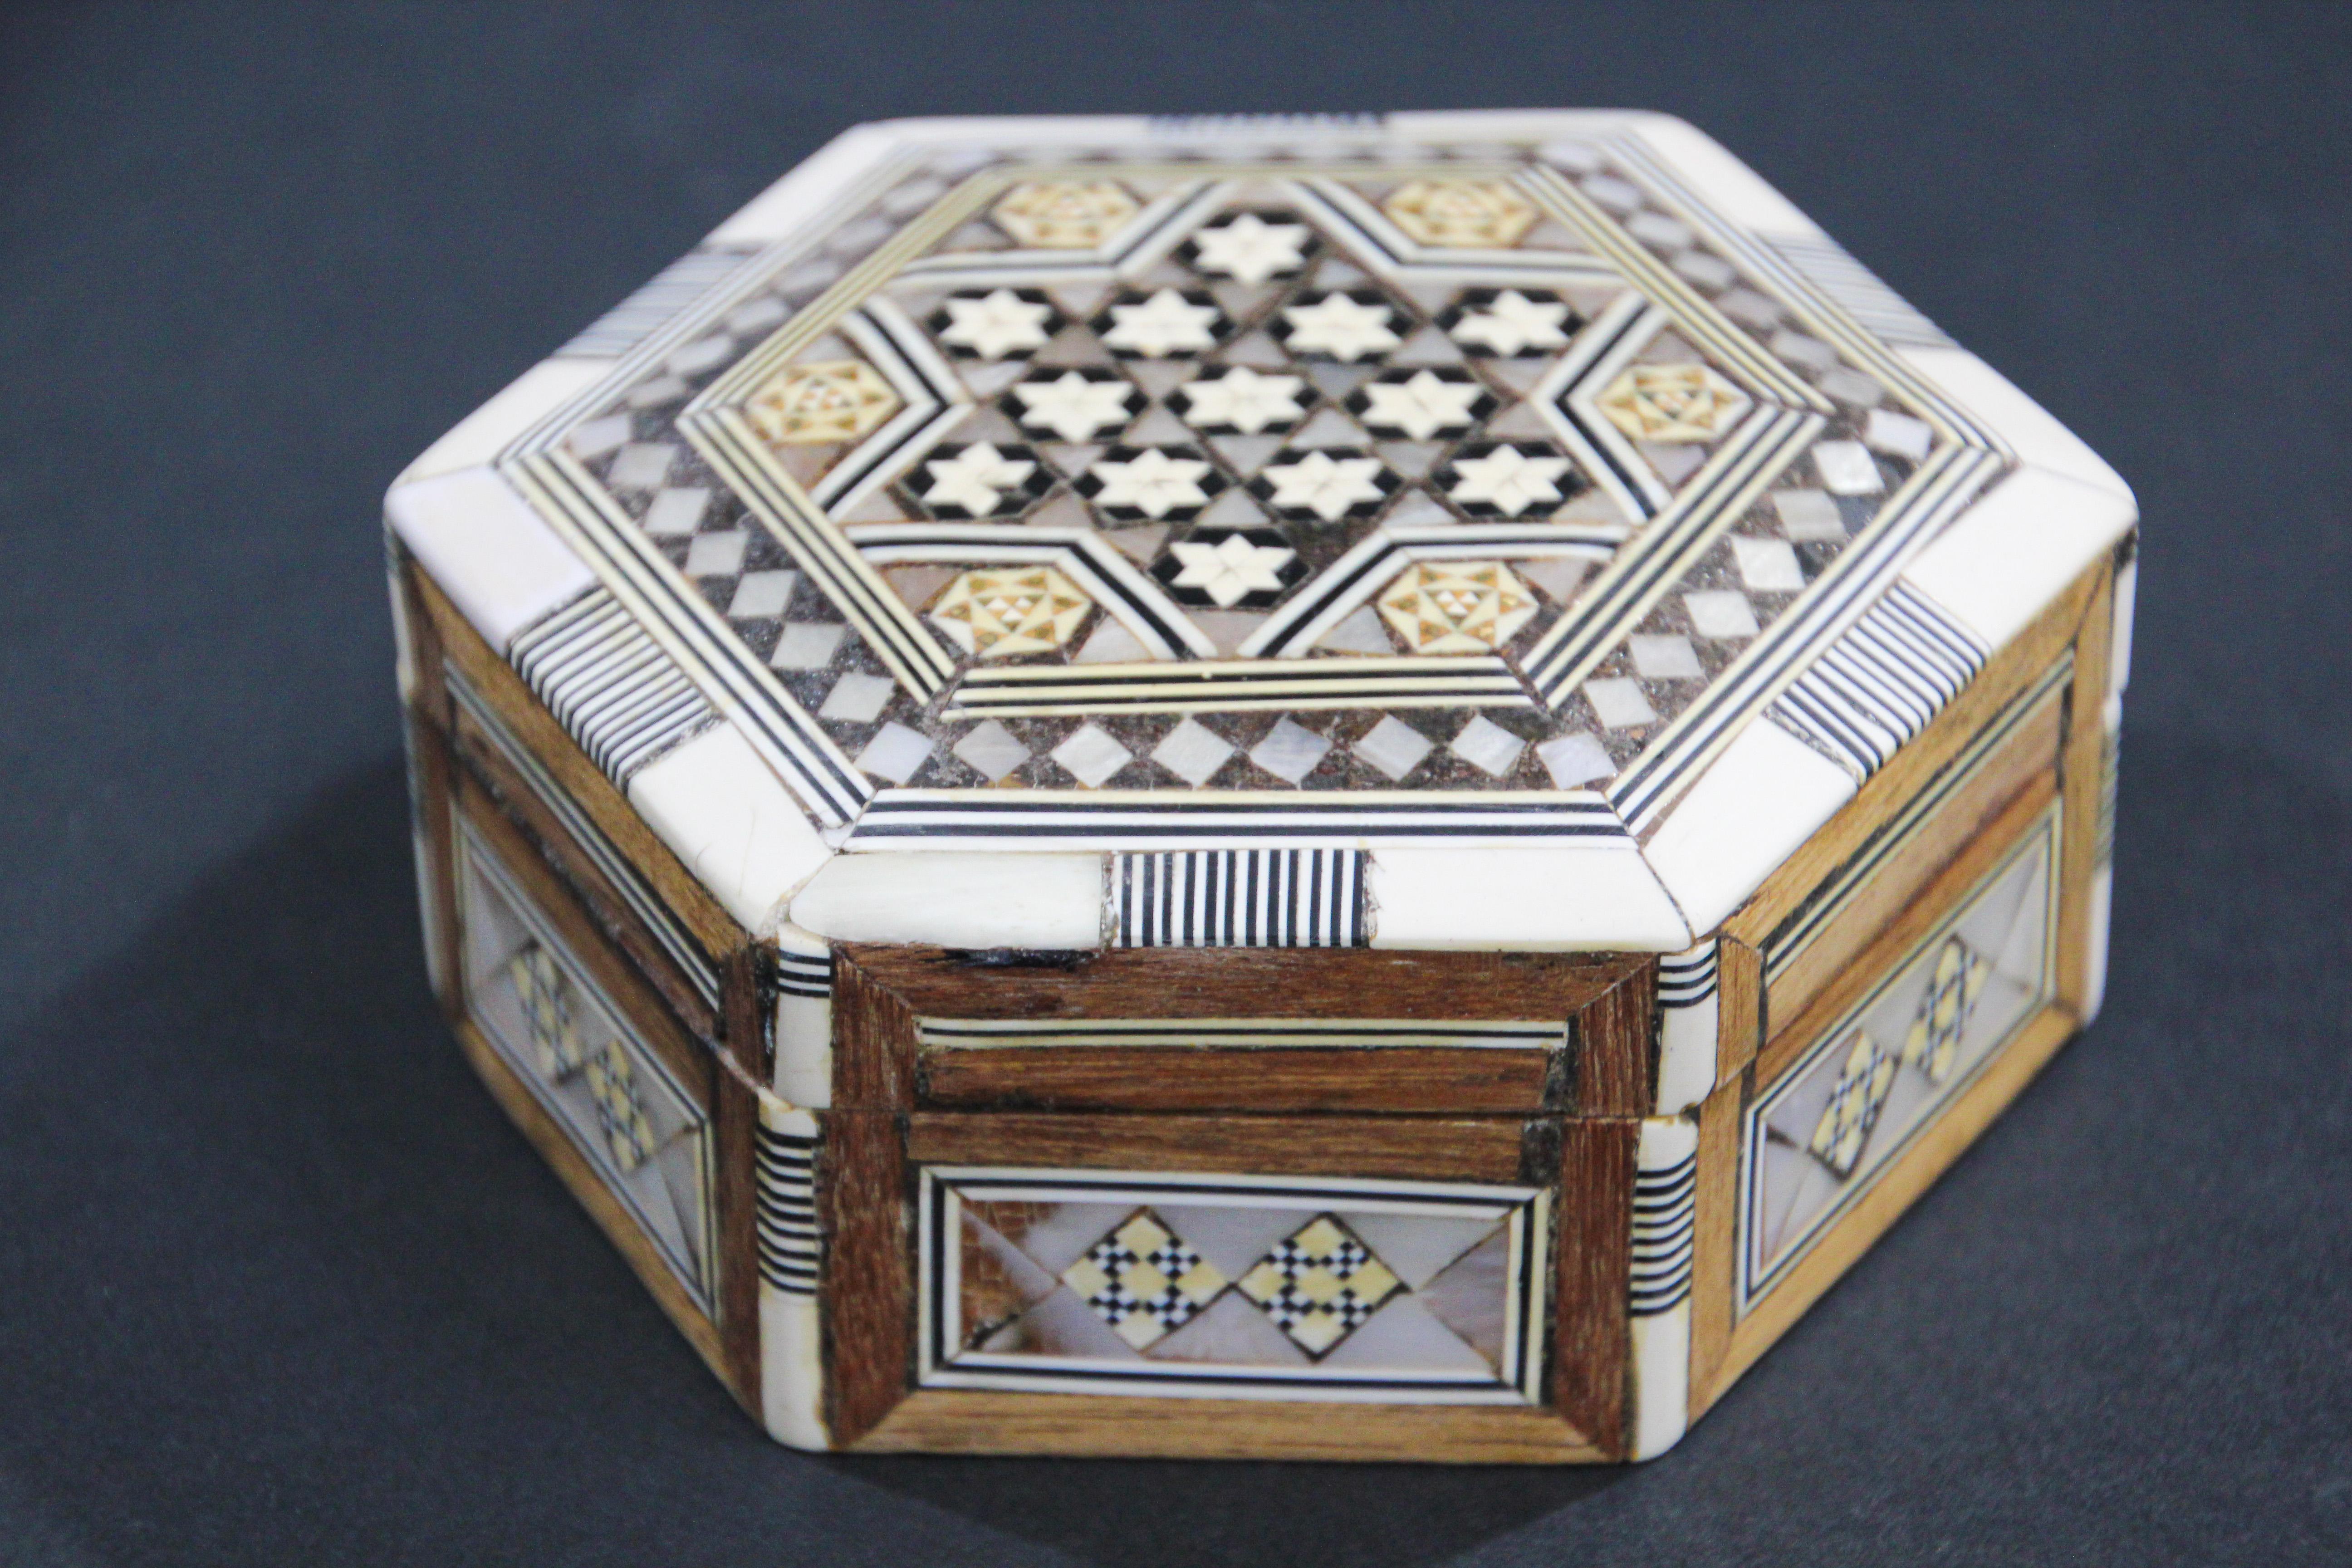 Exquisite handcrafted Middle Eastern Lebanese mosaic marquetry wood box.
Small octagonal walnut Syrian style box intricately decorated with Moorish motif designs which have been painstakingly inlaid with mosaic marquetry.
The interior is lined